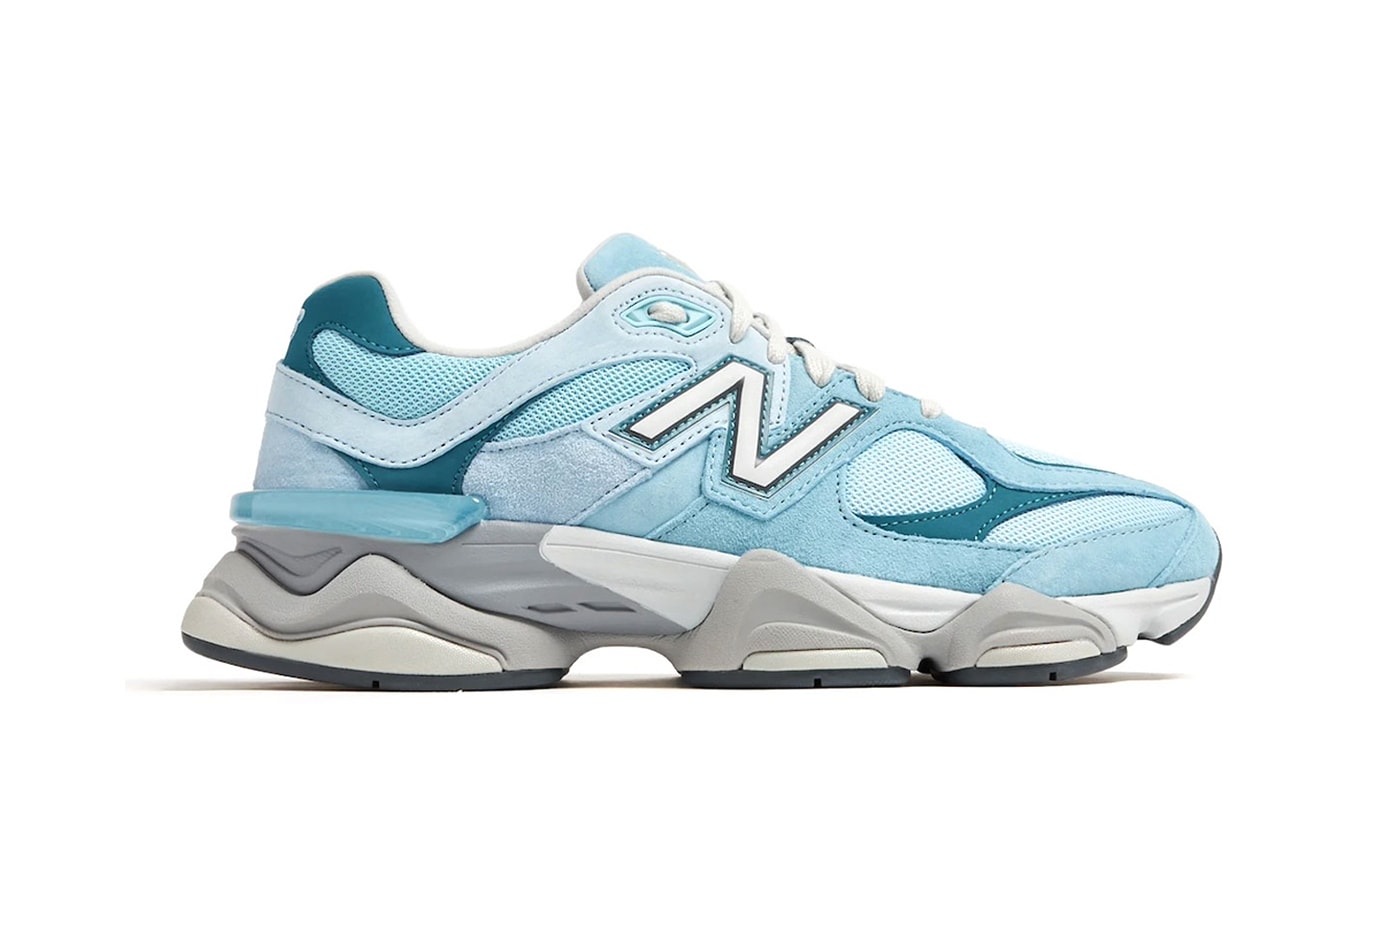 New Balance 9060 Surfaces in "Chrome Blue" U9060EED Chrome Blue/Light Chrome Blue-Elemental Blue sneaker dad shoes futuristic comfort everyday